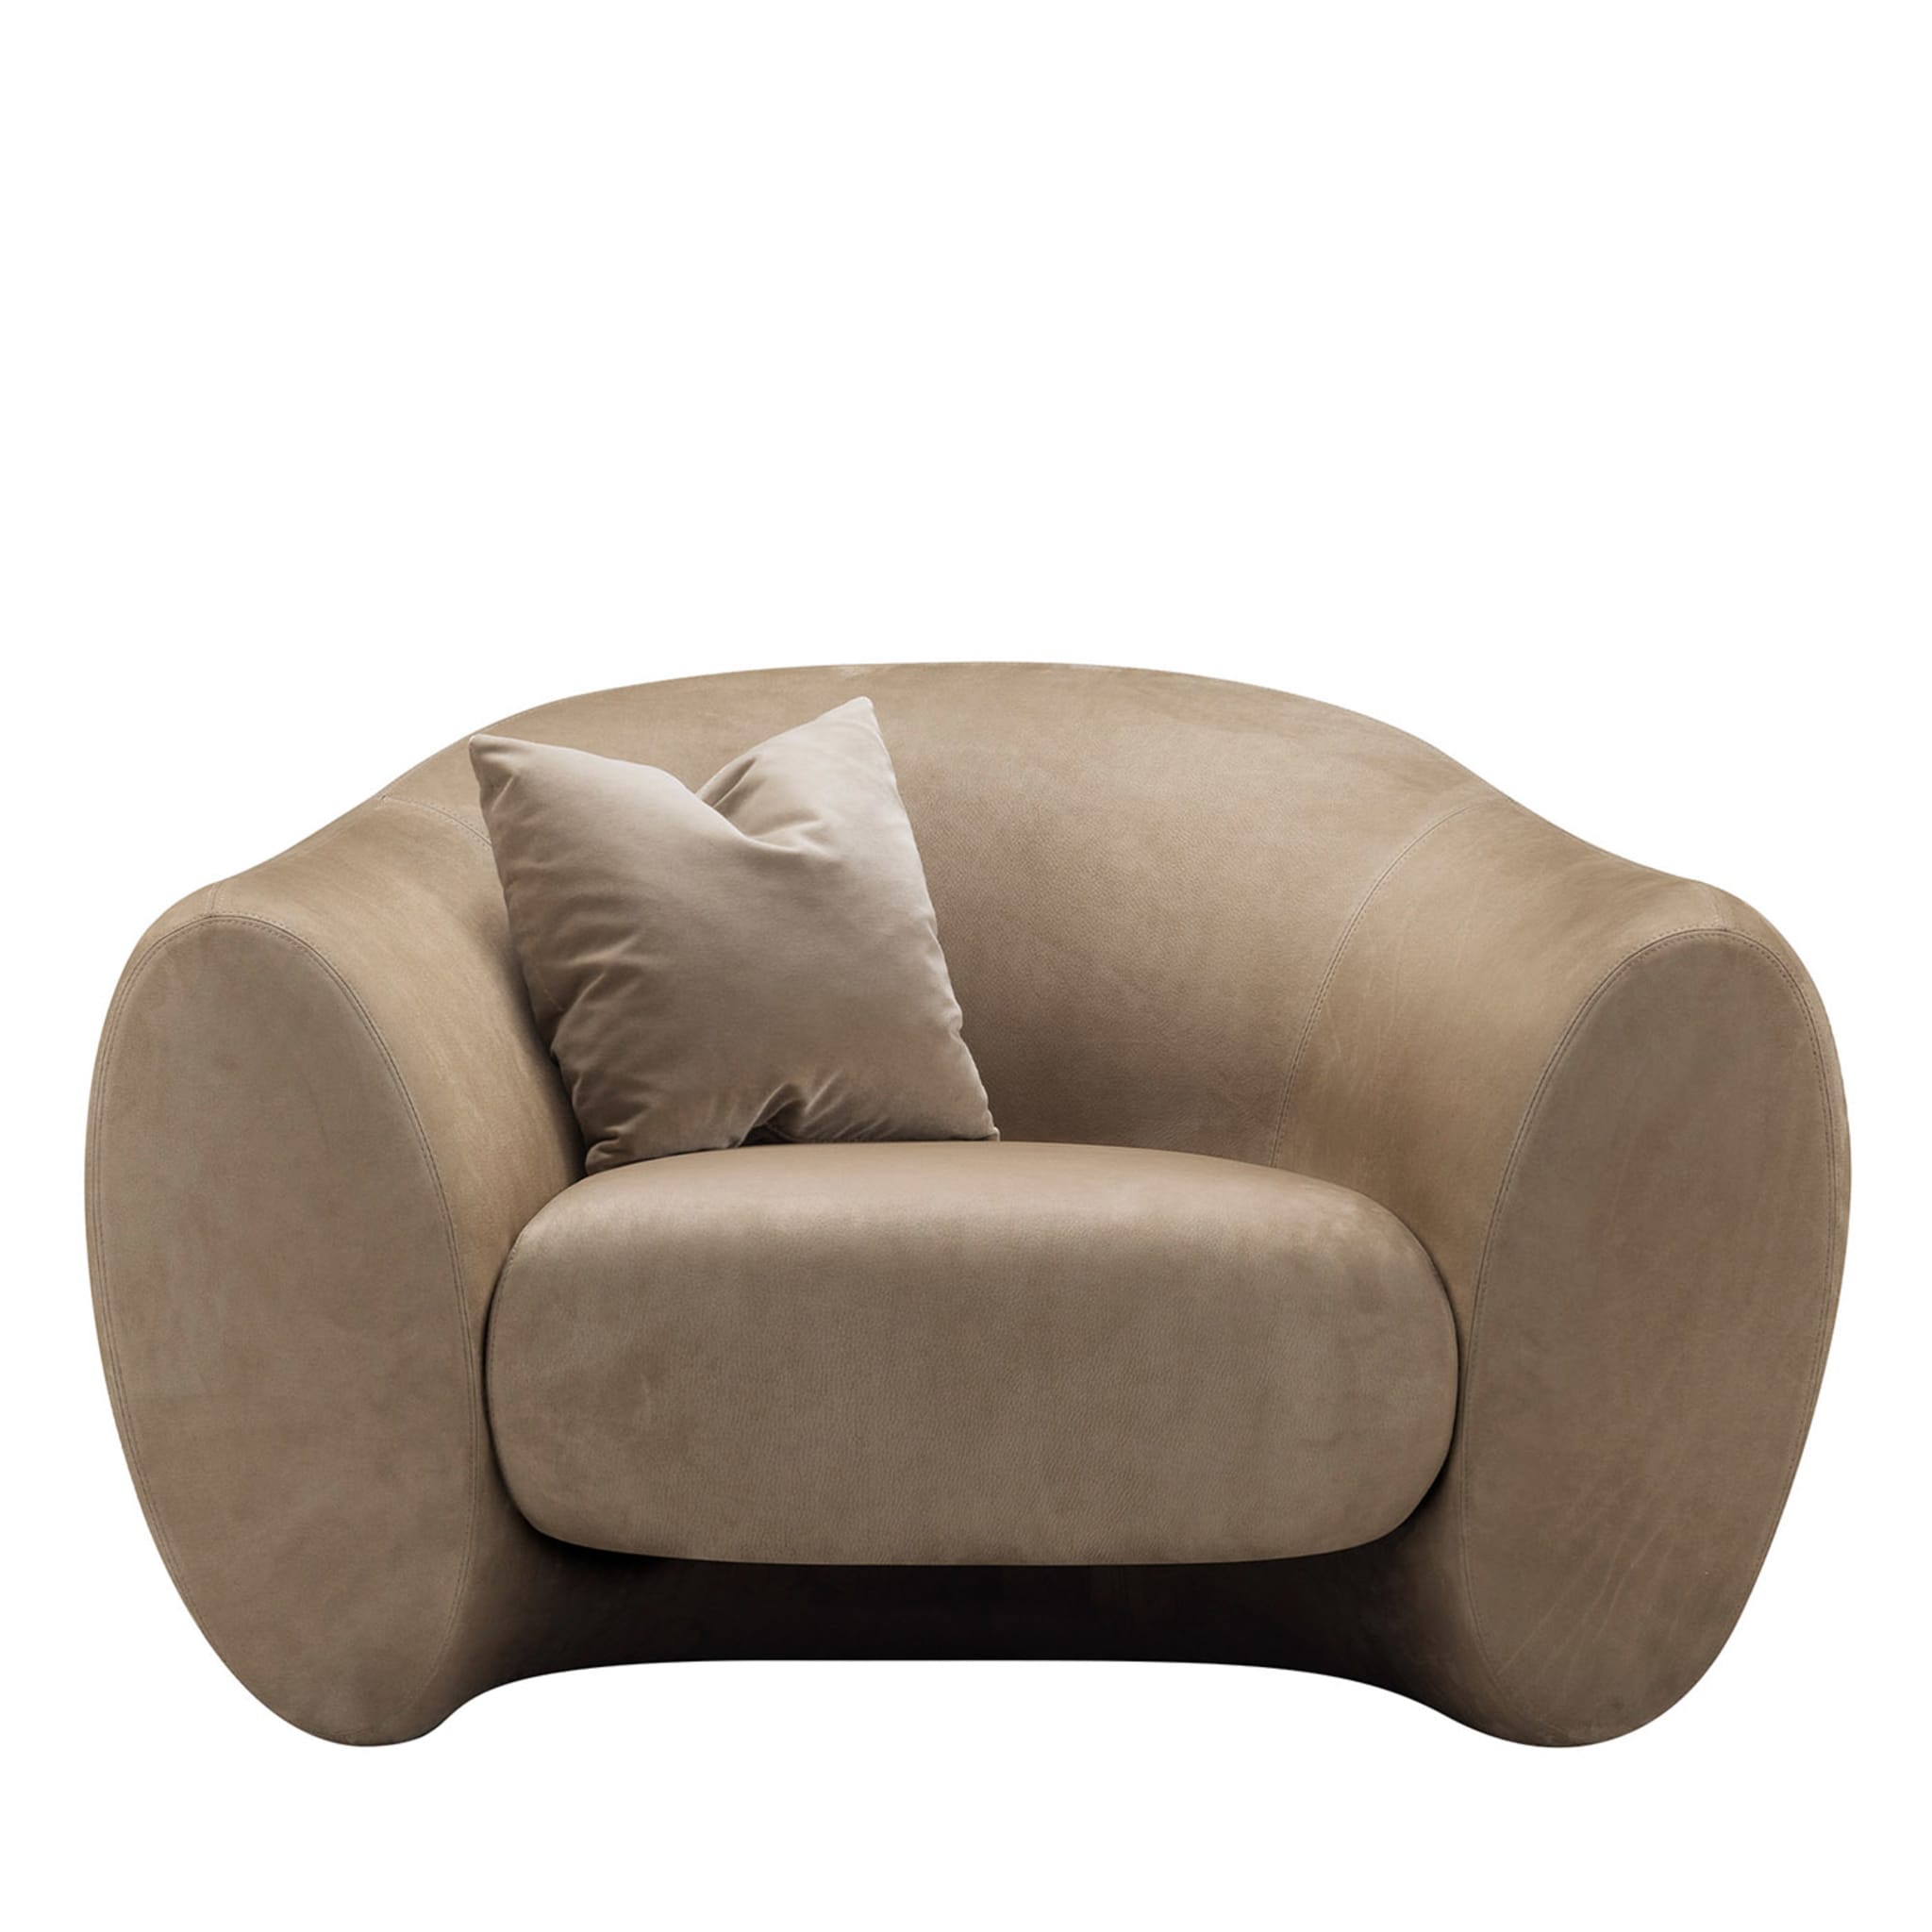 Elephant Beige Armchair by Stefano Giovannoni - Main view